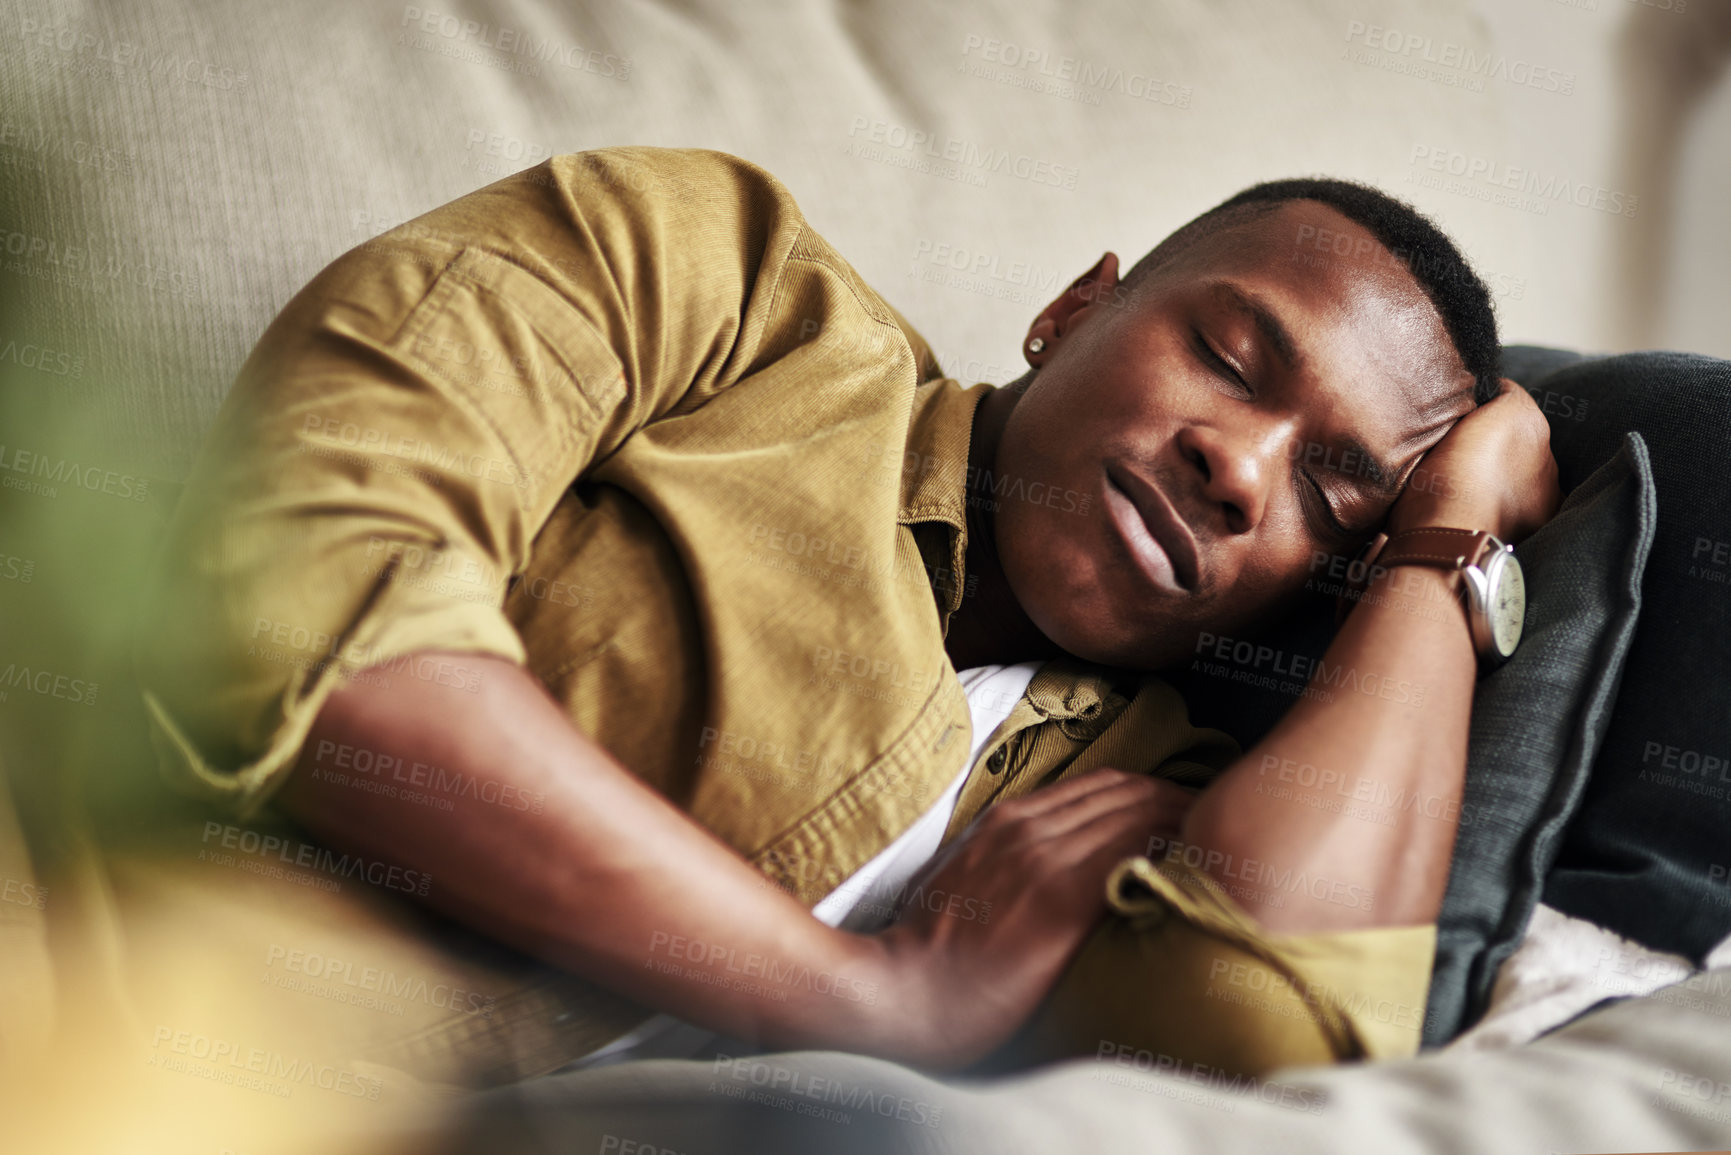 Buy stock photo Cropped shot of a handsome young man sleeping on the couch in his living room at home